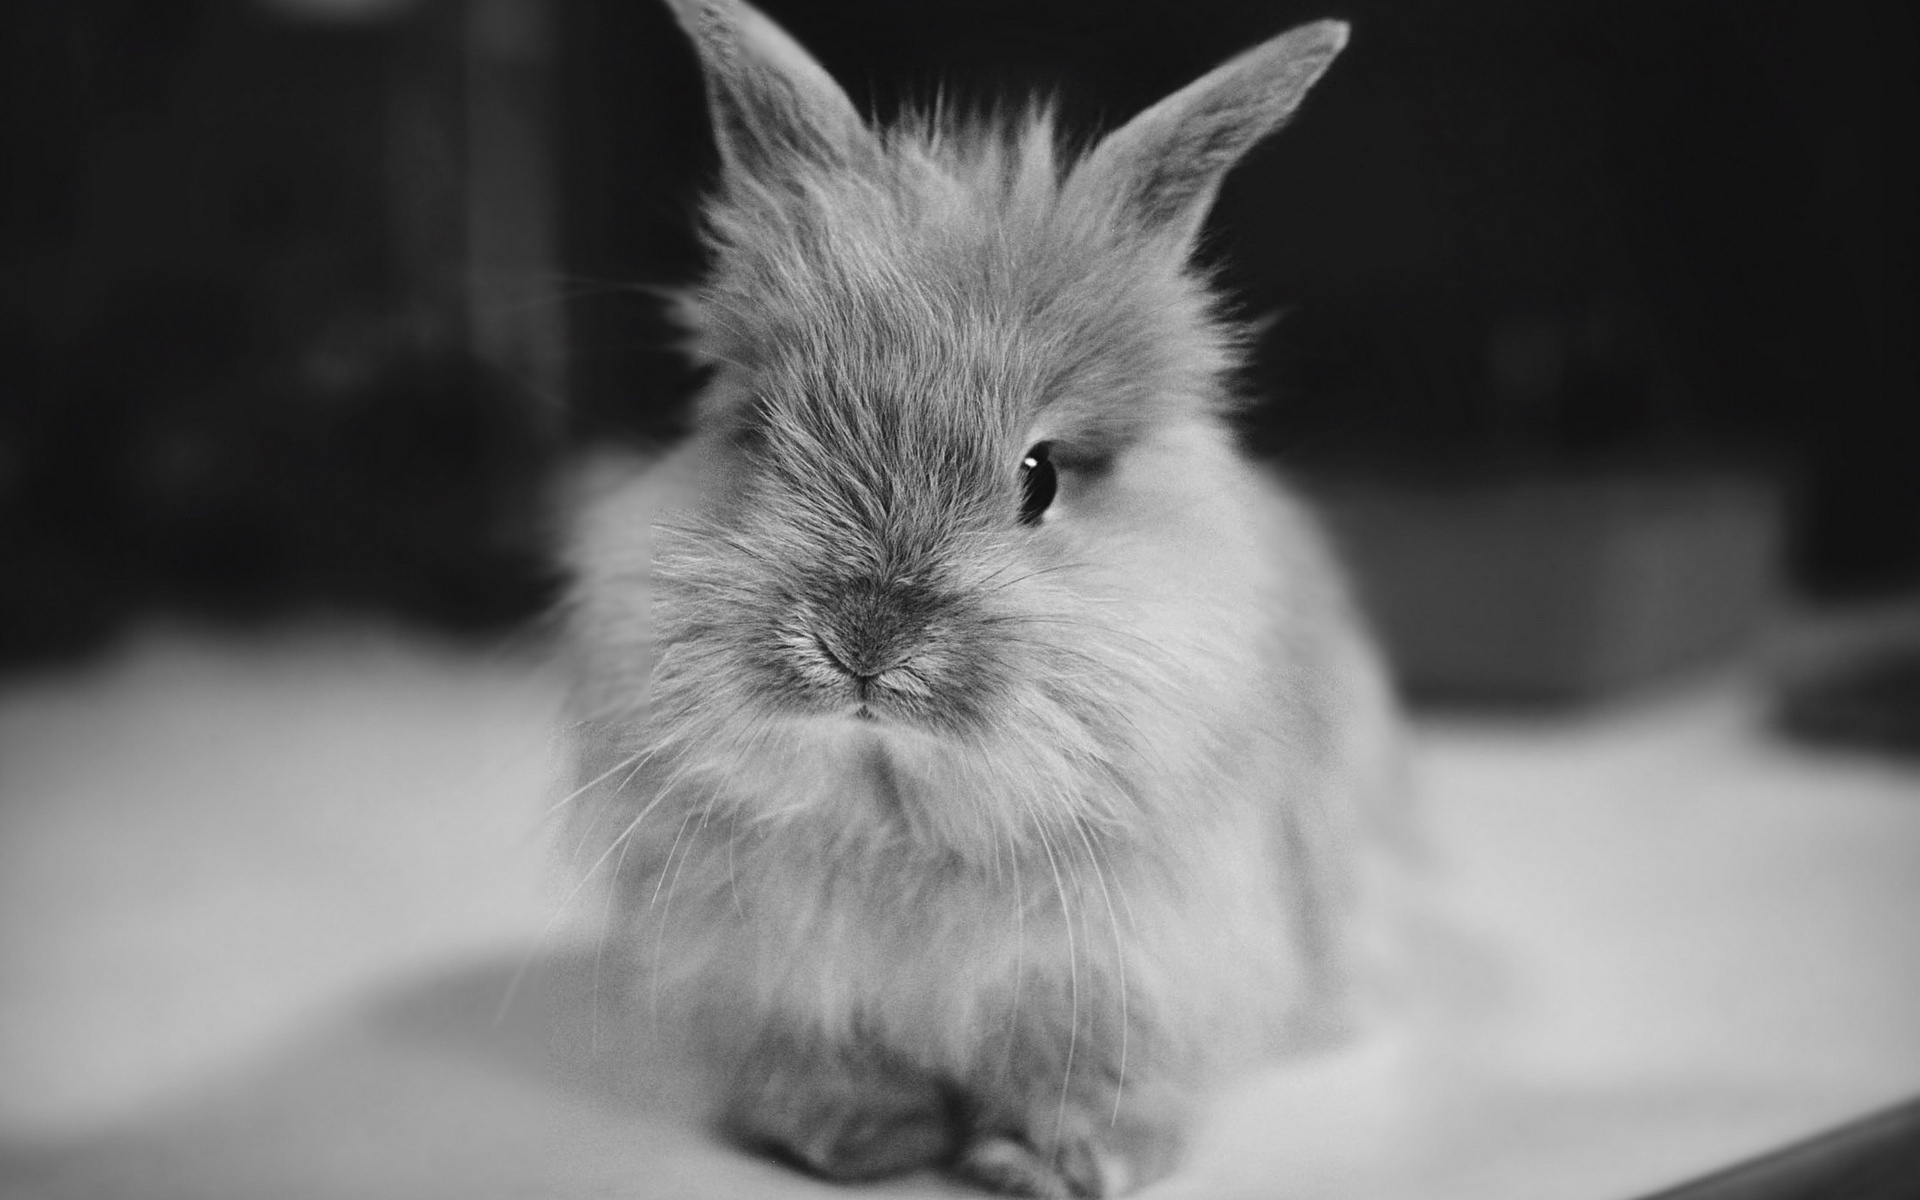 Wallpaper. Animals. photo. picture. fluffy Bunny, two small black eyes, baby